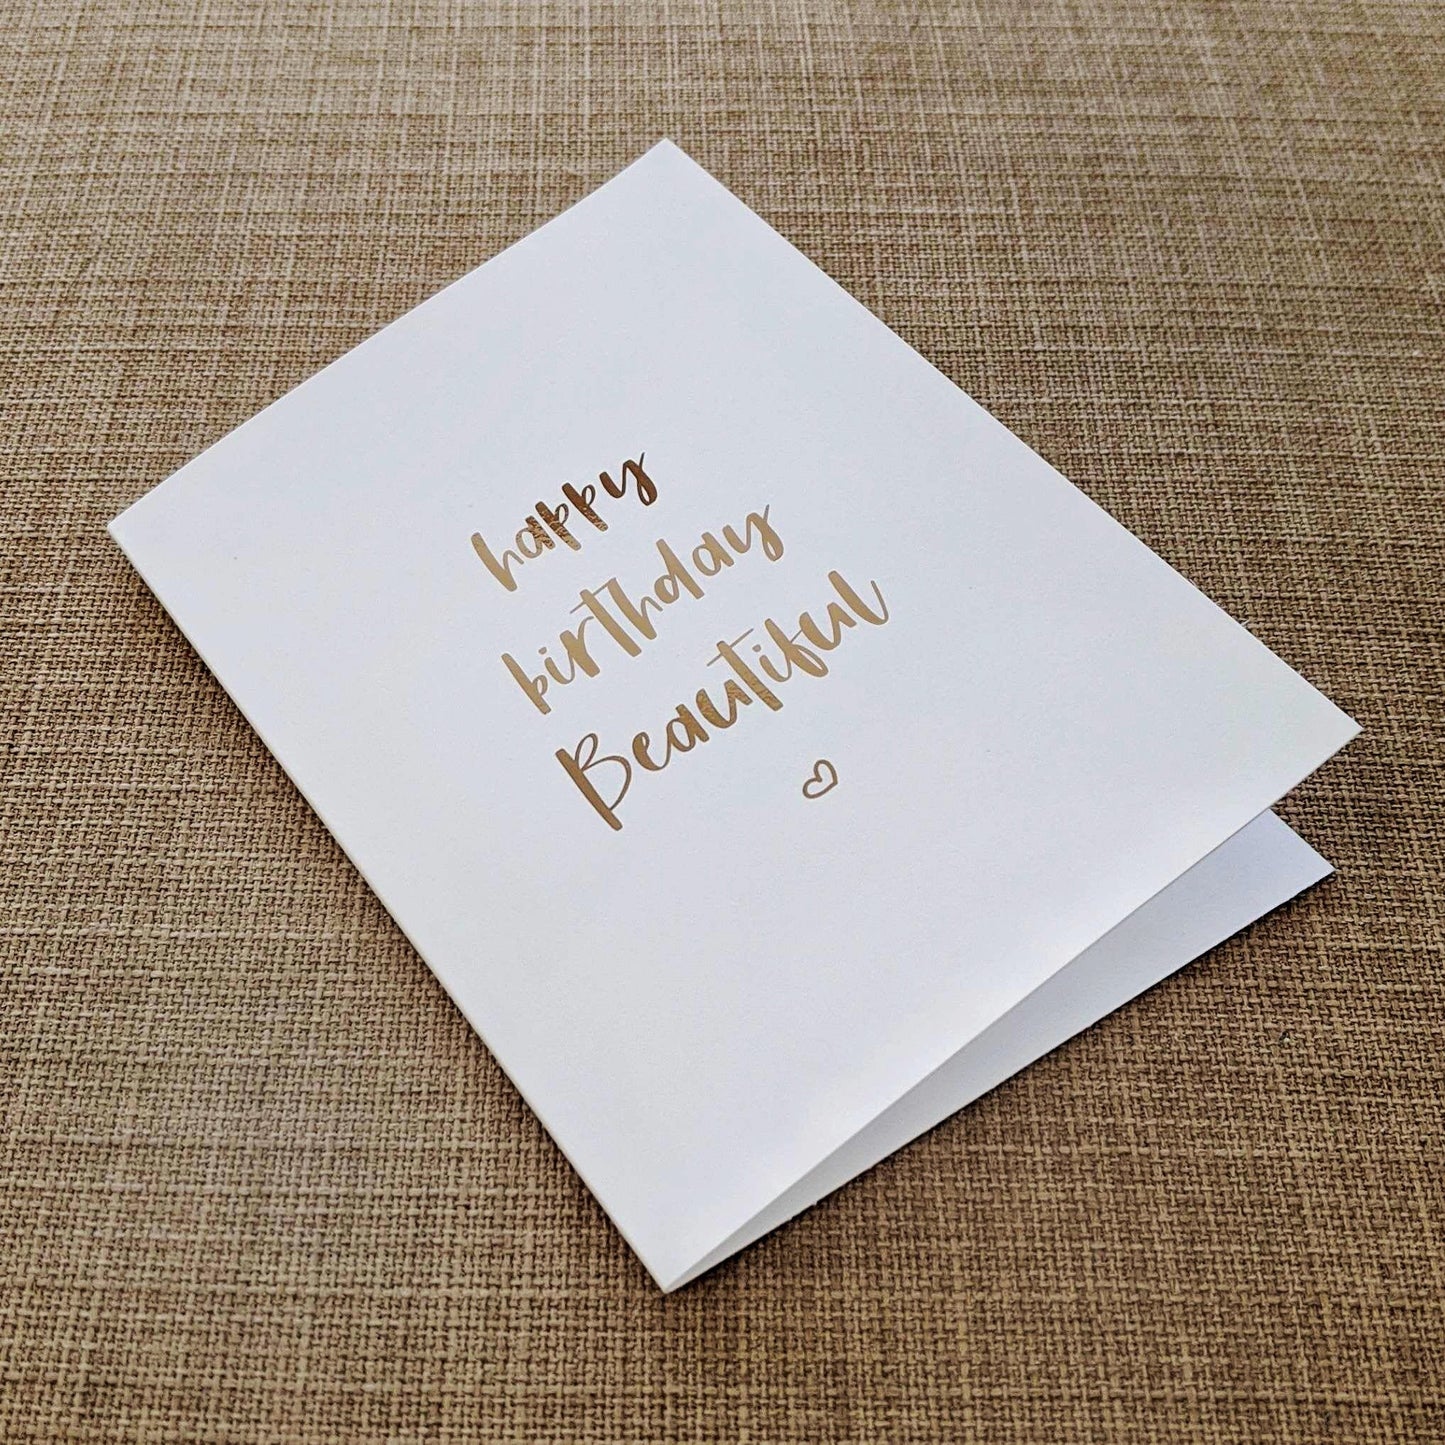 Greeting card with foiled lettering of "happy birthday Beautiful"